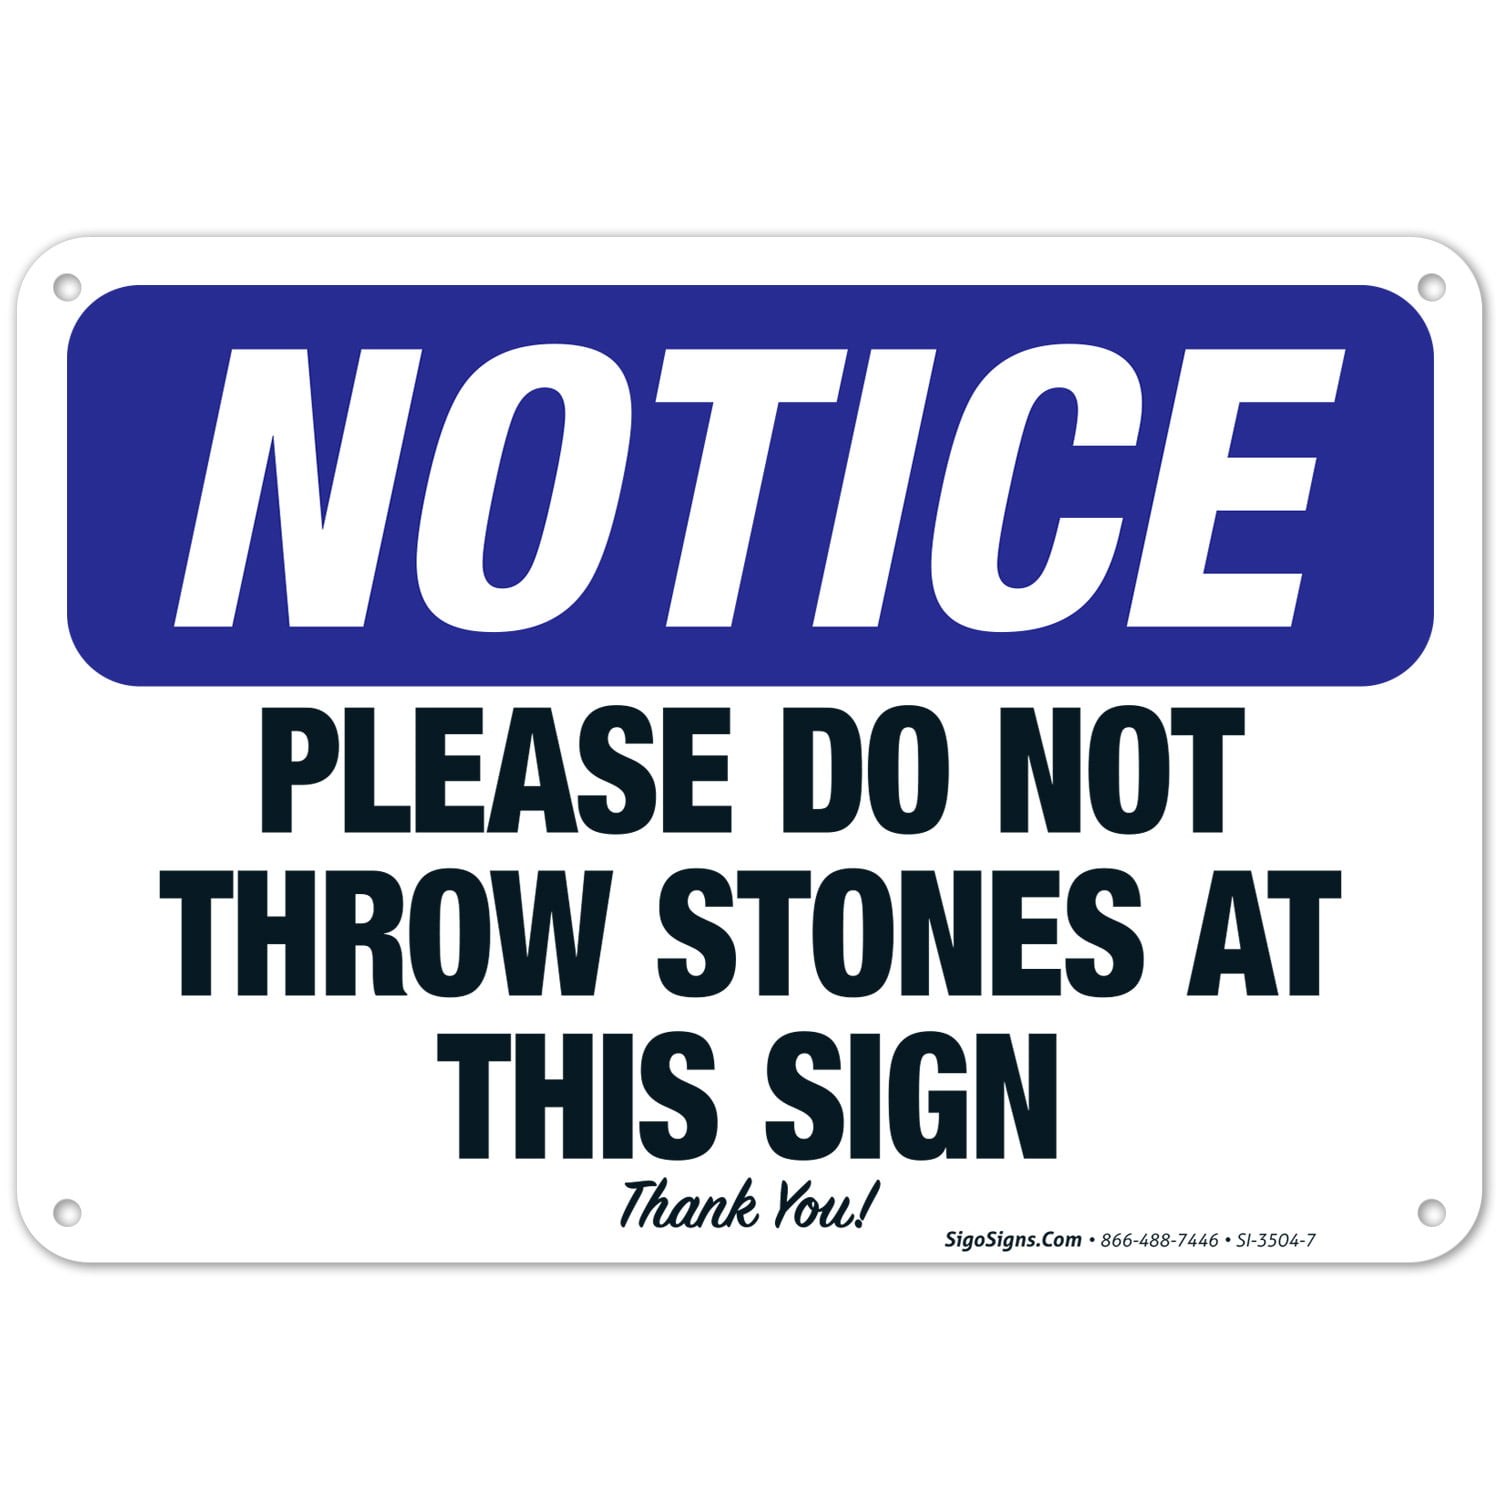 Please Do Not Throw Stones At This Sign - Thank You Sign, OSHA Notice ...